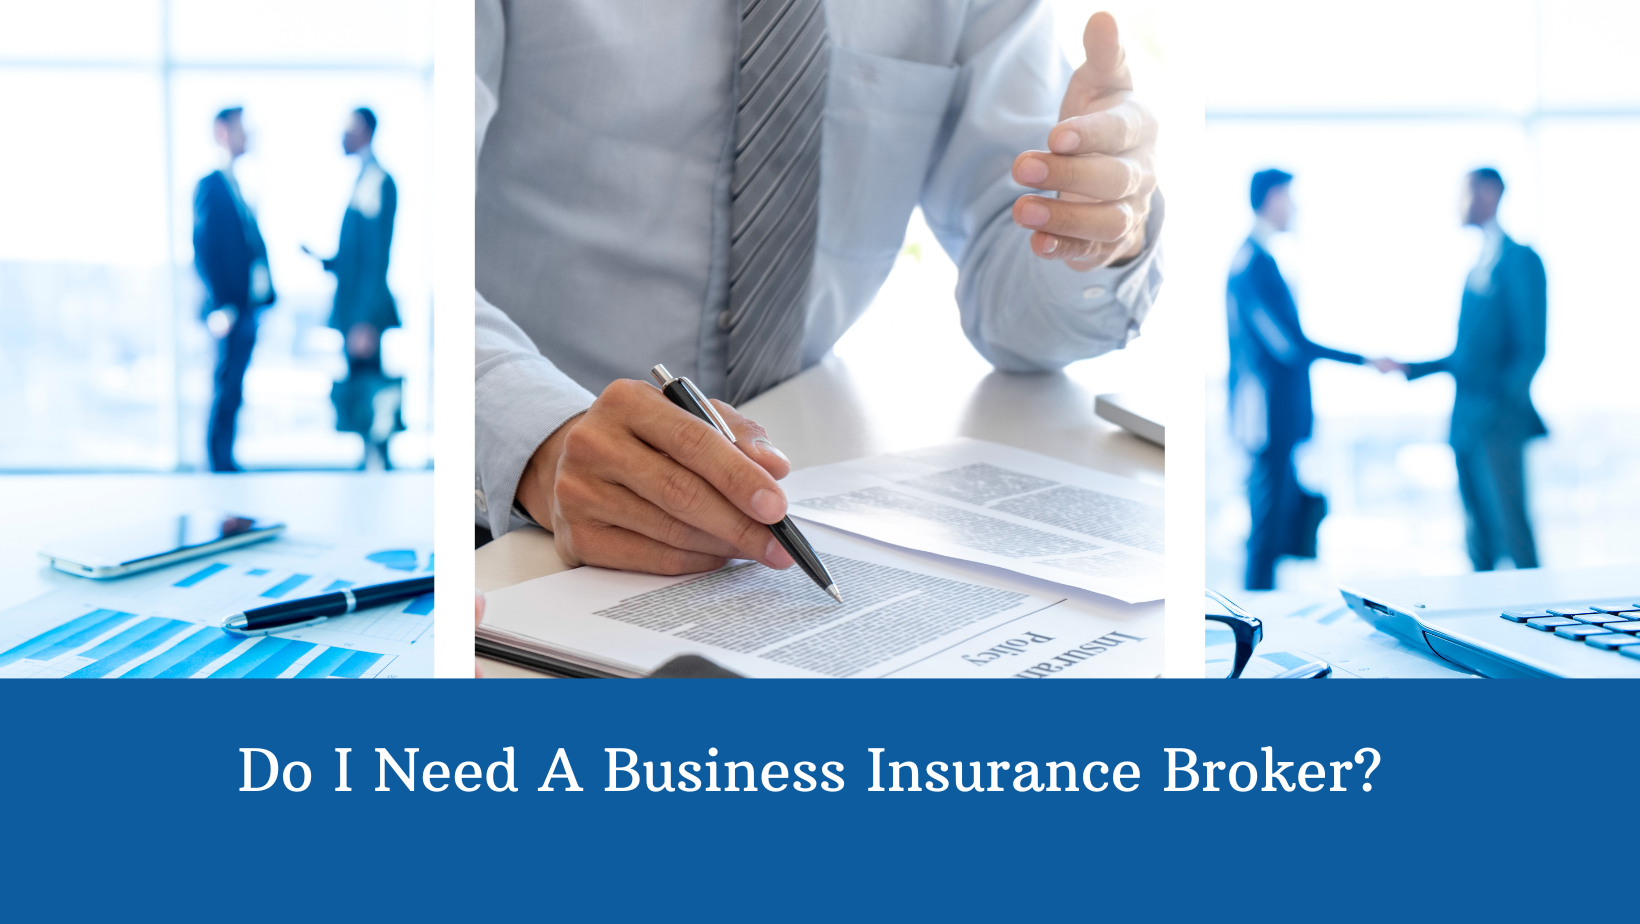 Do you need a business insurance broker?|common insurance mistakes to avoid in the new year